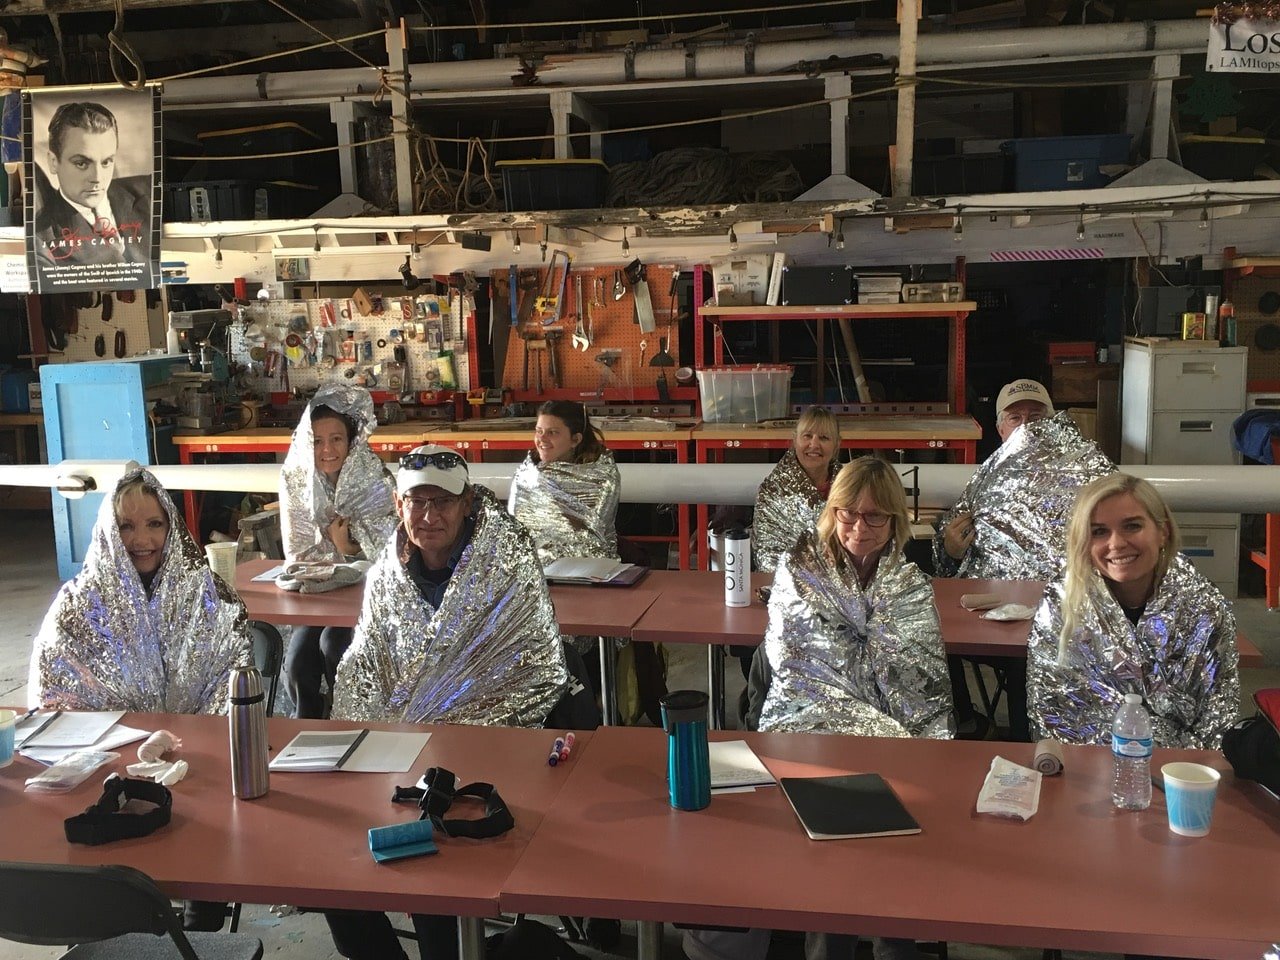   A group of trainees modeling emergency blankets while learning warming techniques for at sea.  